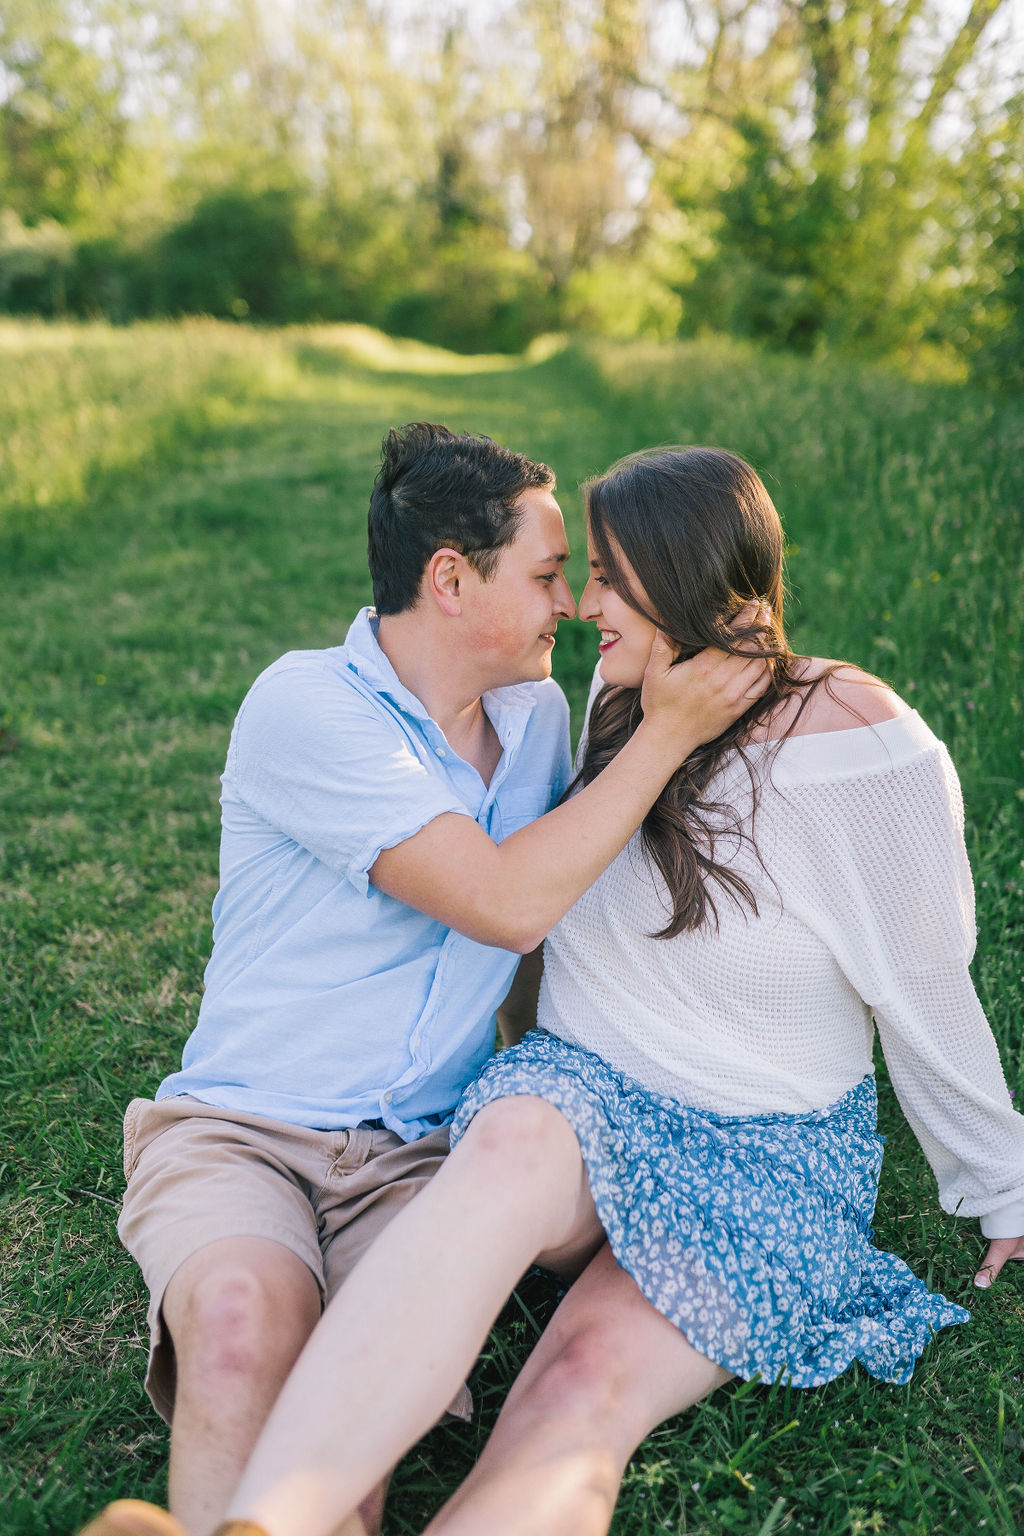 Meads Quarry engagement session with man and woman wearing blue and sitting on green grass next to a tree line, man is holding womans hair back while holding her neck as they smiles at each other